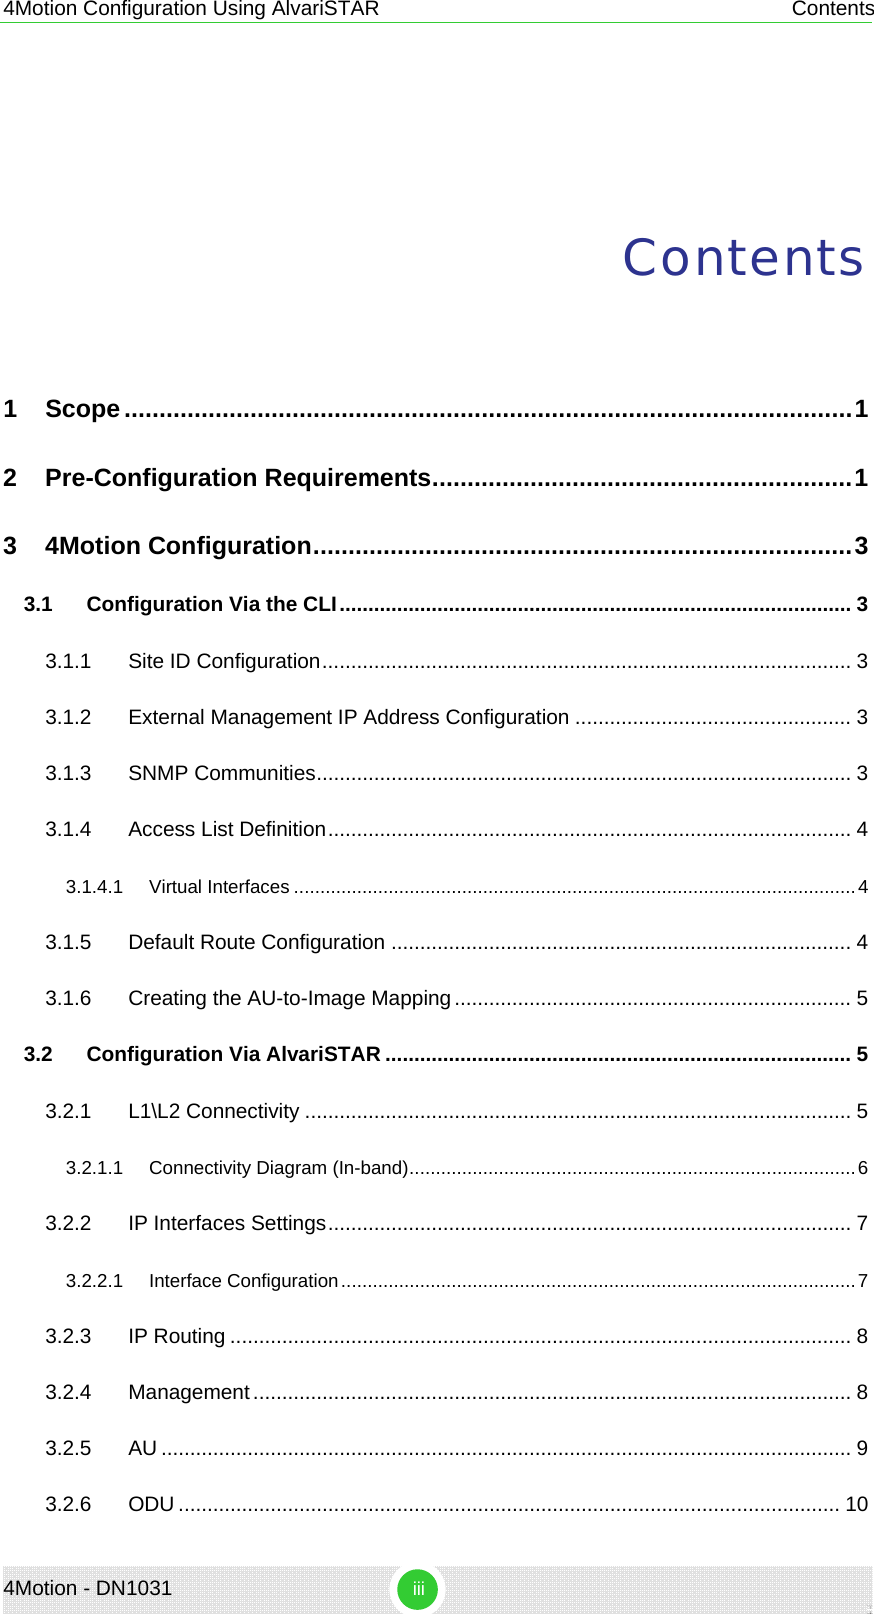 4Motion Configuration Using AlvariSTAR  Contents Contents 1 Scope........................................................................................................1 2 Pre-Configuration Requirements............................................................1 3 4Motion Configuration.............................................................................3 3.1 Configuration Via the CLI......................................................................................... 3 3.1.1 Site ID Configuration............................................................................................ 3 3.1.2 External Management IP Address Configuration ................................................ 3 3.1.3 SNMP Communities............................................................................................. 3 3.1.4 Access List Definition........................................................................................... 4 3.1.4.1 Virtual Interfaces ...........................................................................................................4 3.1.5 Default Route Configuration ................................................................................ 4 3.1.6 Creating the AU-to-Image Mapping..................................................................... 5 3.2 Configuration Via AlvariSTAR ................................................................................. 5 3.2.1 L1\L2 Connectivity ............................................................................................... 5 3.2.1.1 Connectivity Diagram (In-band).....................................................................................6 3.2.2 IP Interfaces Settings........................................................................................... 7 3.2.2.1 Interface Configuration..................................................................................................7 3.2.3 IP Routing ............................................................................................................ 8 3.2.4 Management........................................................................................................ 8 3.2.5 AU ........................................................................................................................ 9 3.2.6 ODU ................................................................................................................... 10 4Motion - DN1031  iii 